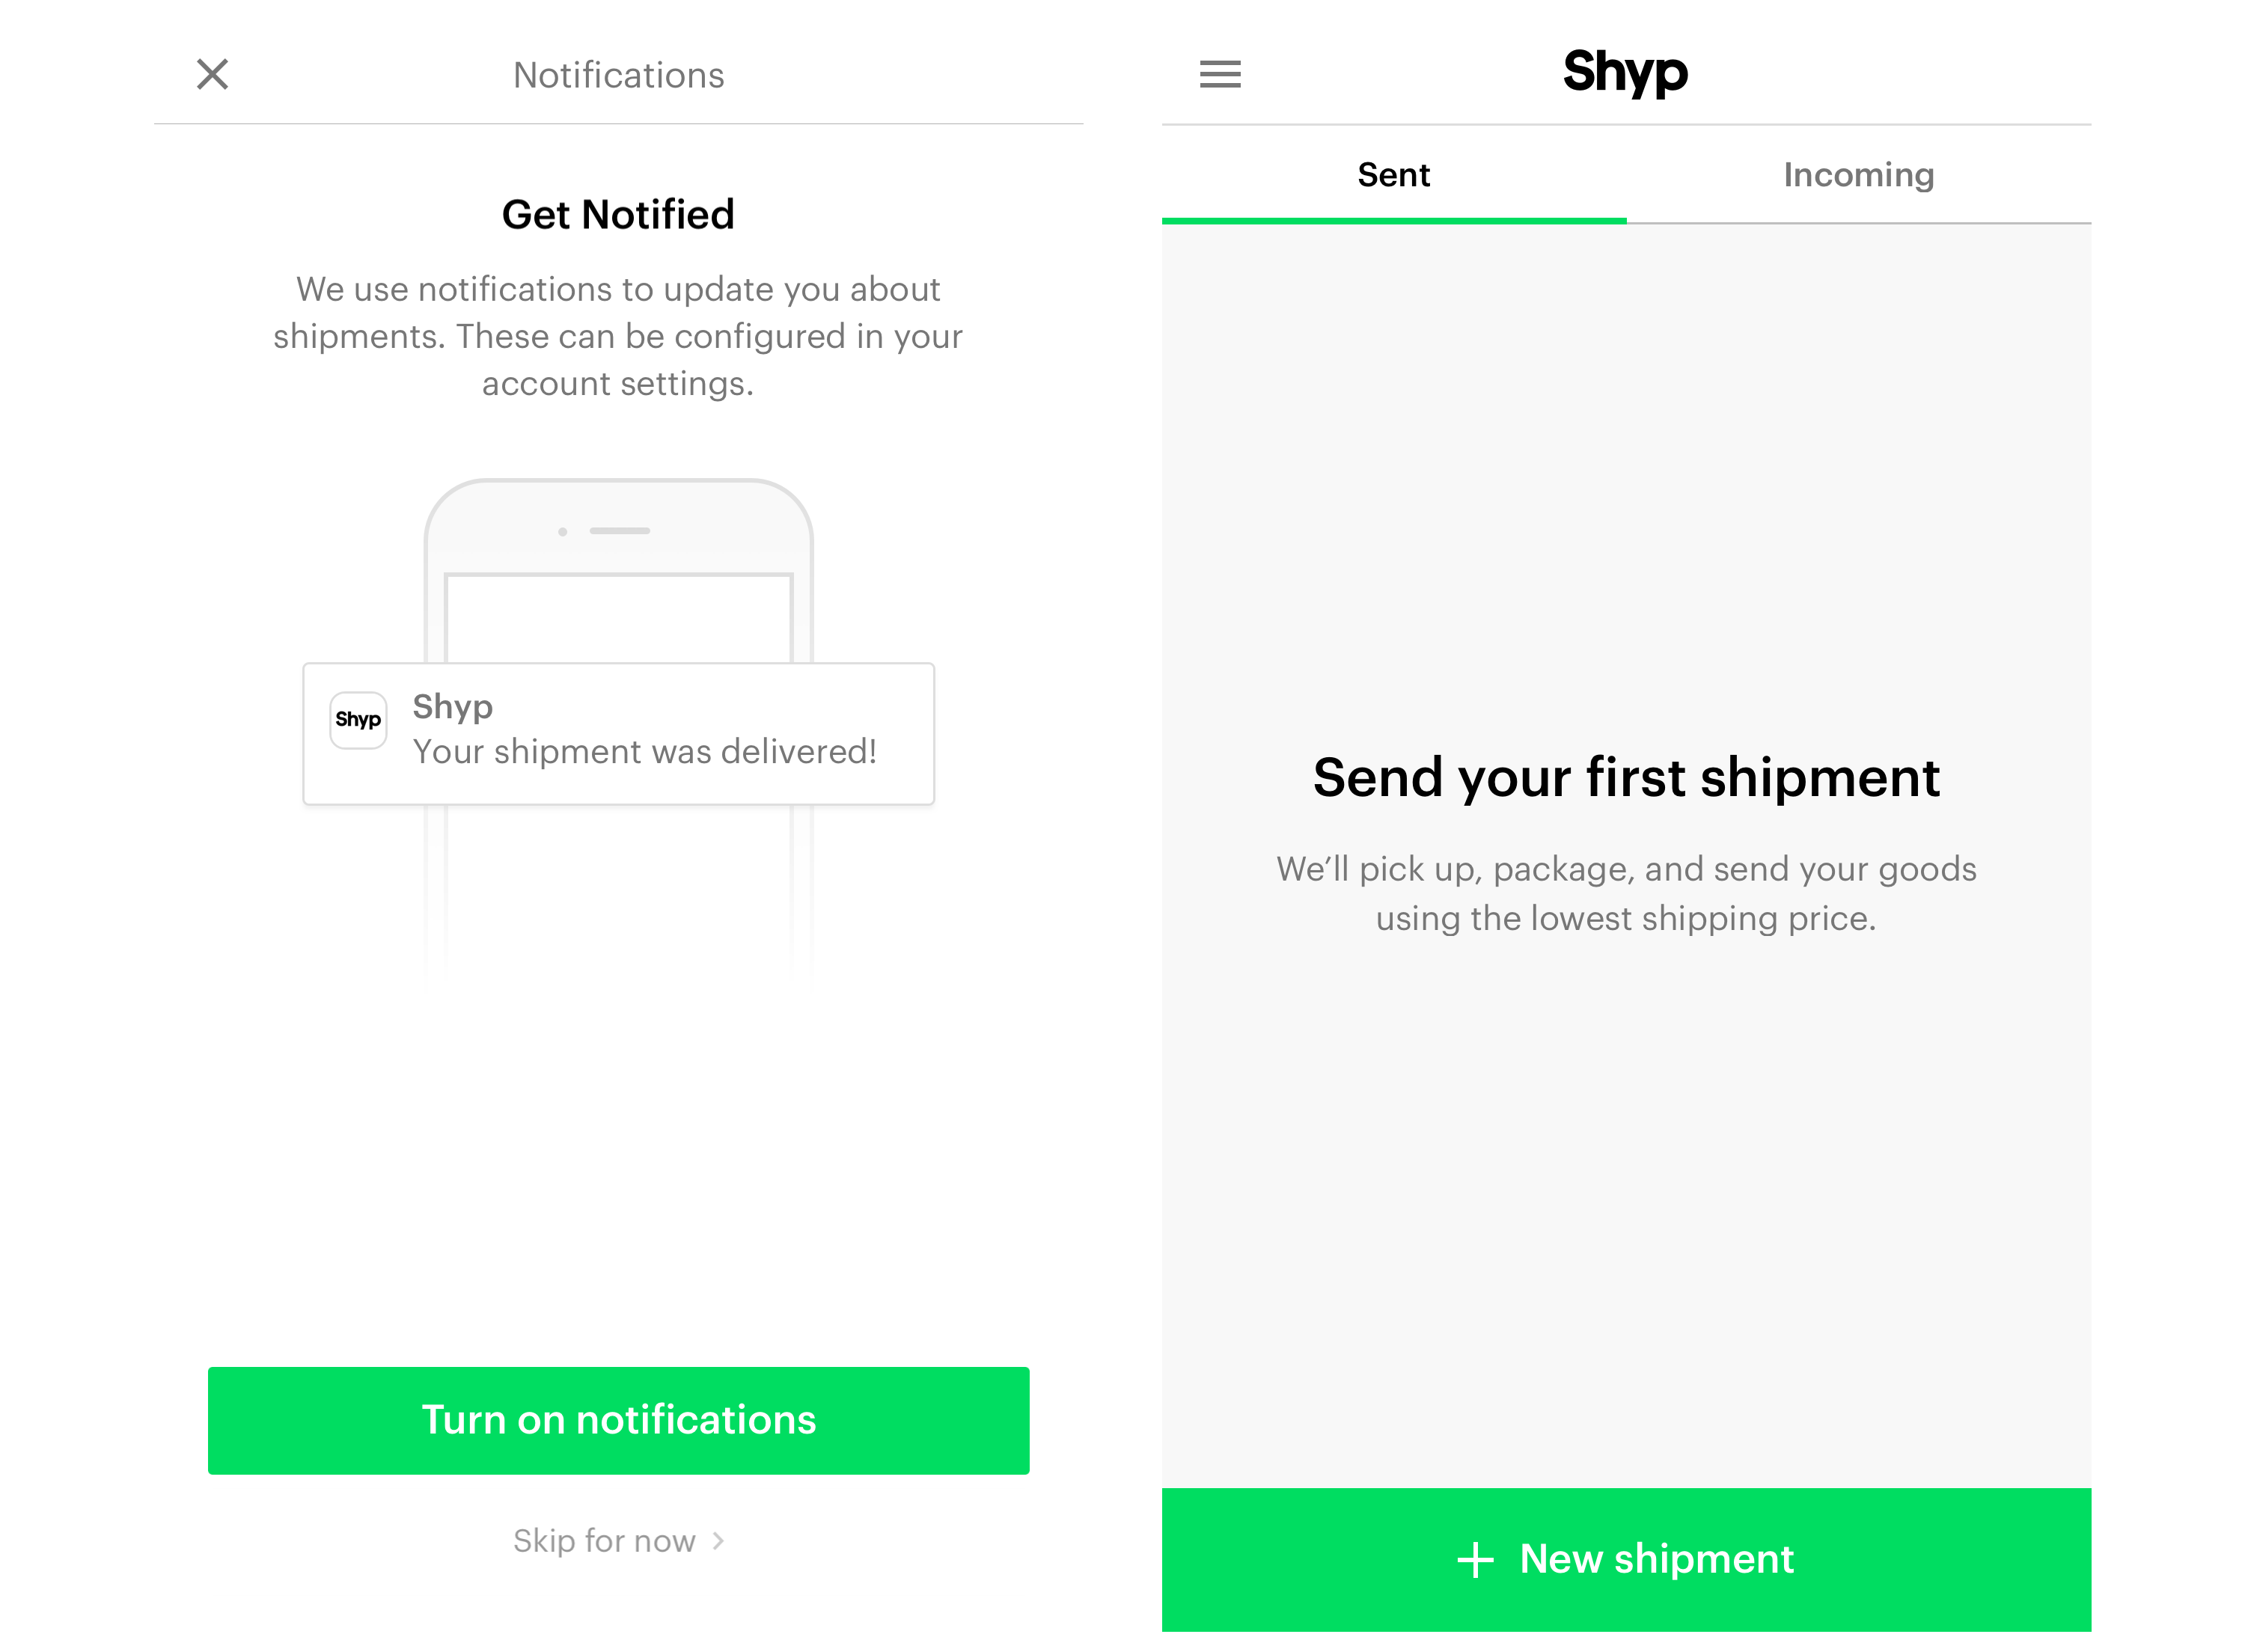 shyp-mobile-app-optimization-push-notifications-prompt-example